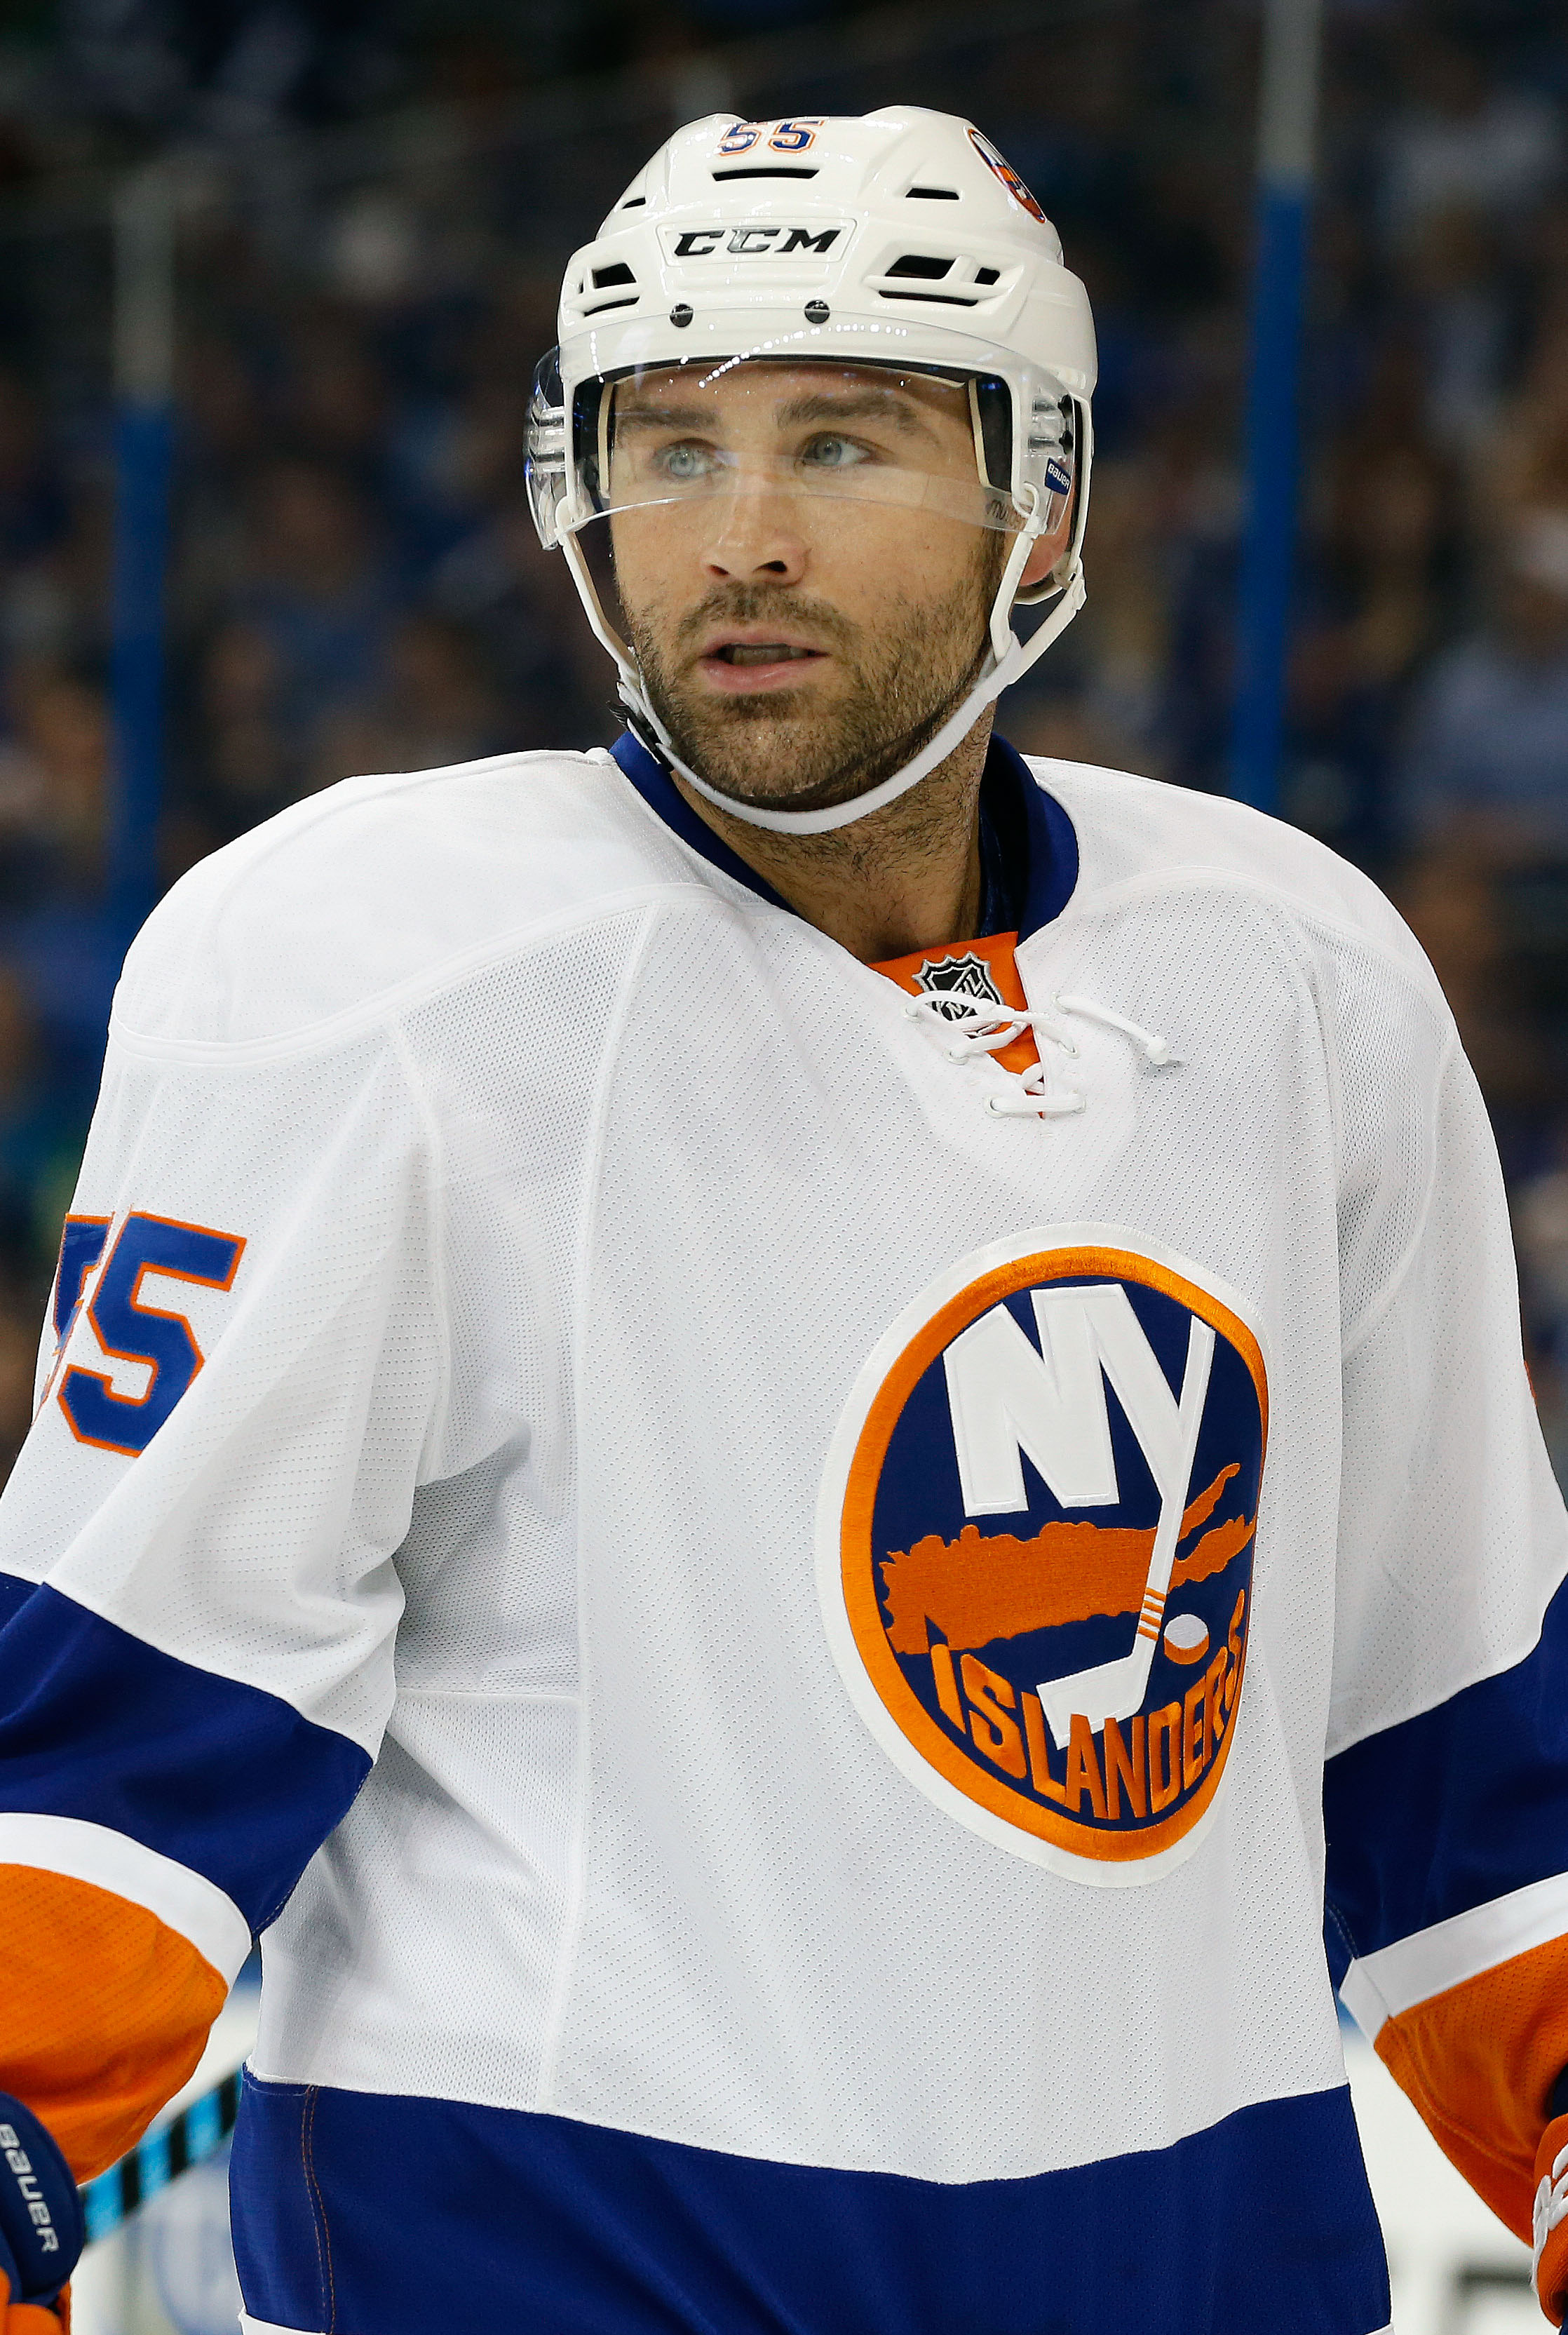 Johnny Boychuk is calling it a career due to an eye injury he